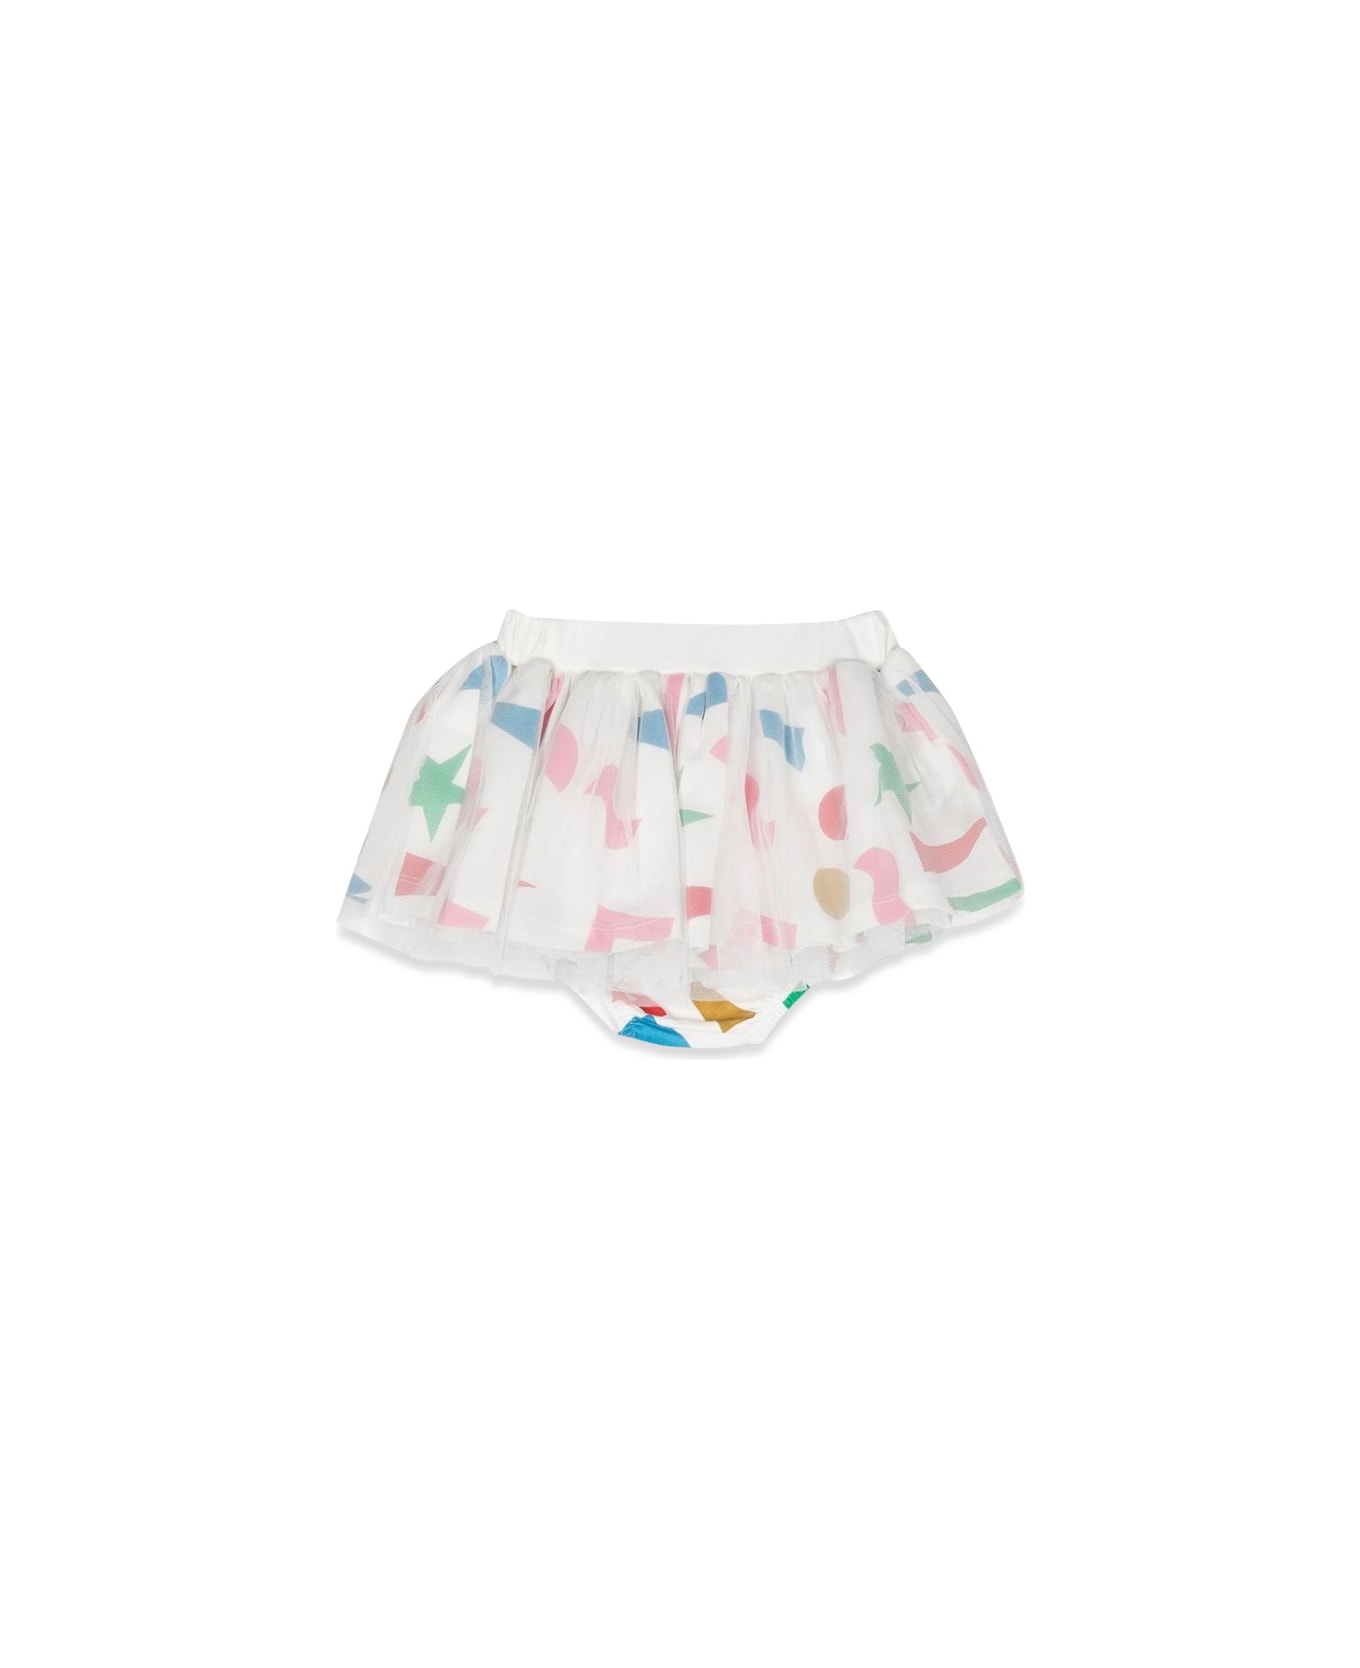 Stella McCartney Kids Skirt With Coulottes - MULTICOLOUR